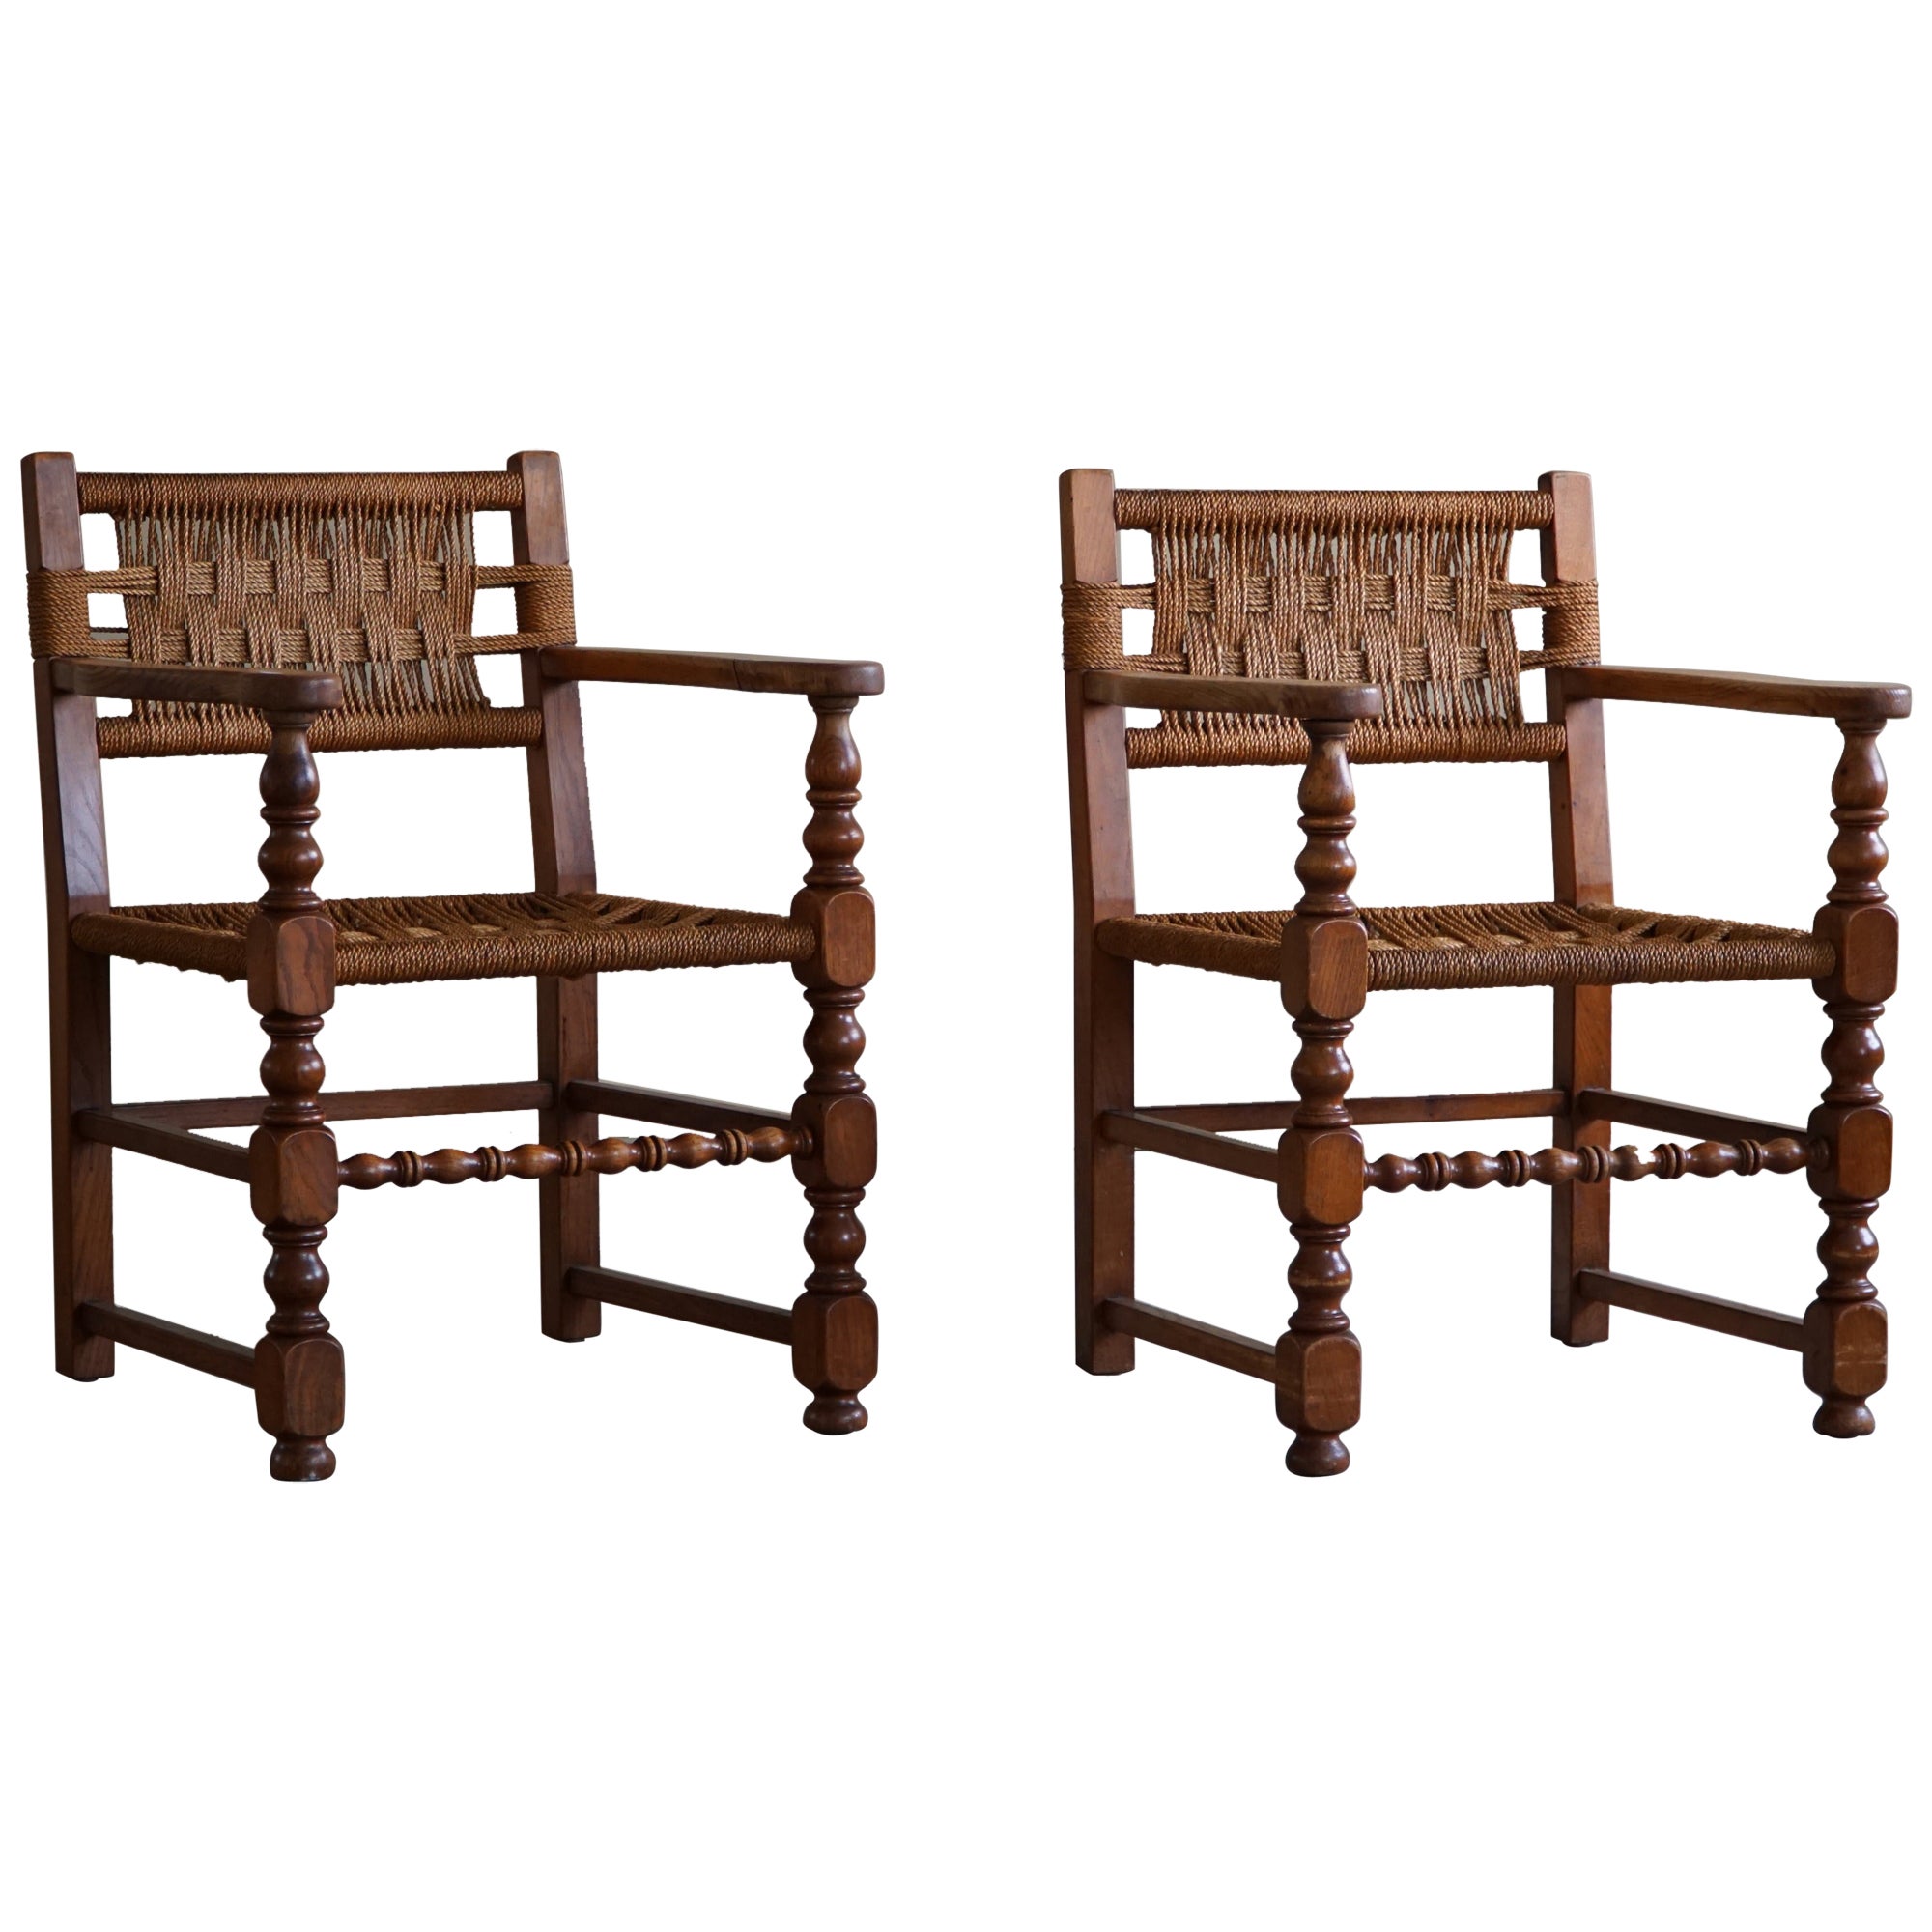 Pair of Sculptural Vintage Armchair in Oak & Papercord, Charles Dudouyt, 1940s For Sale